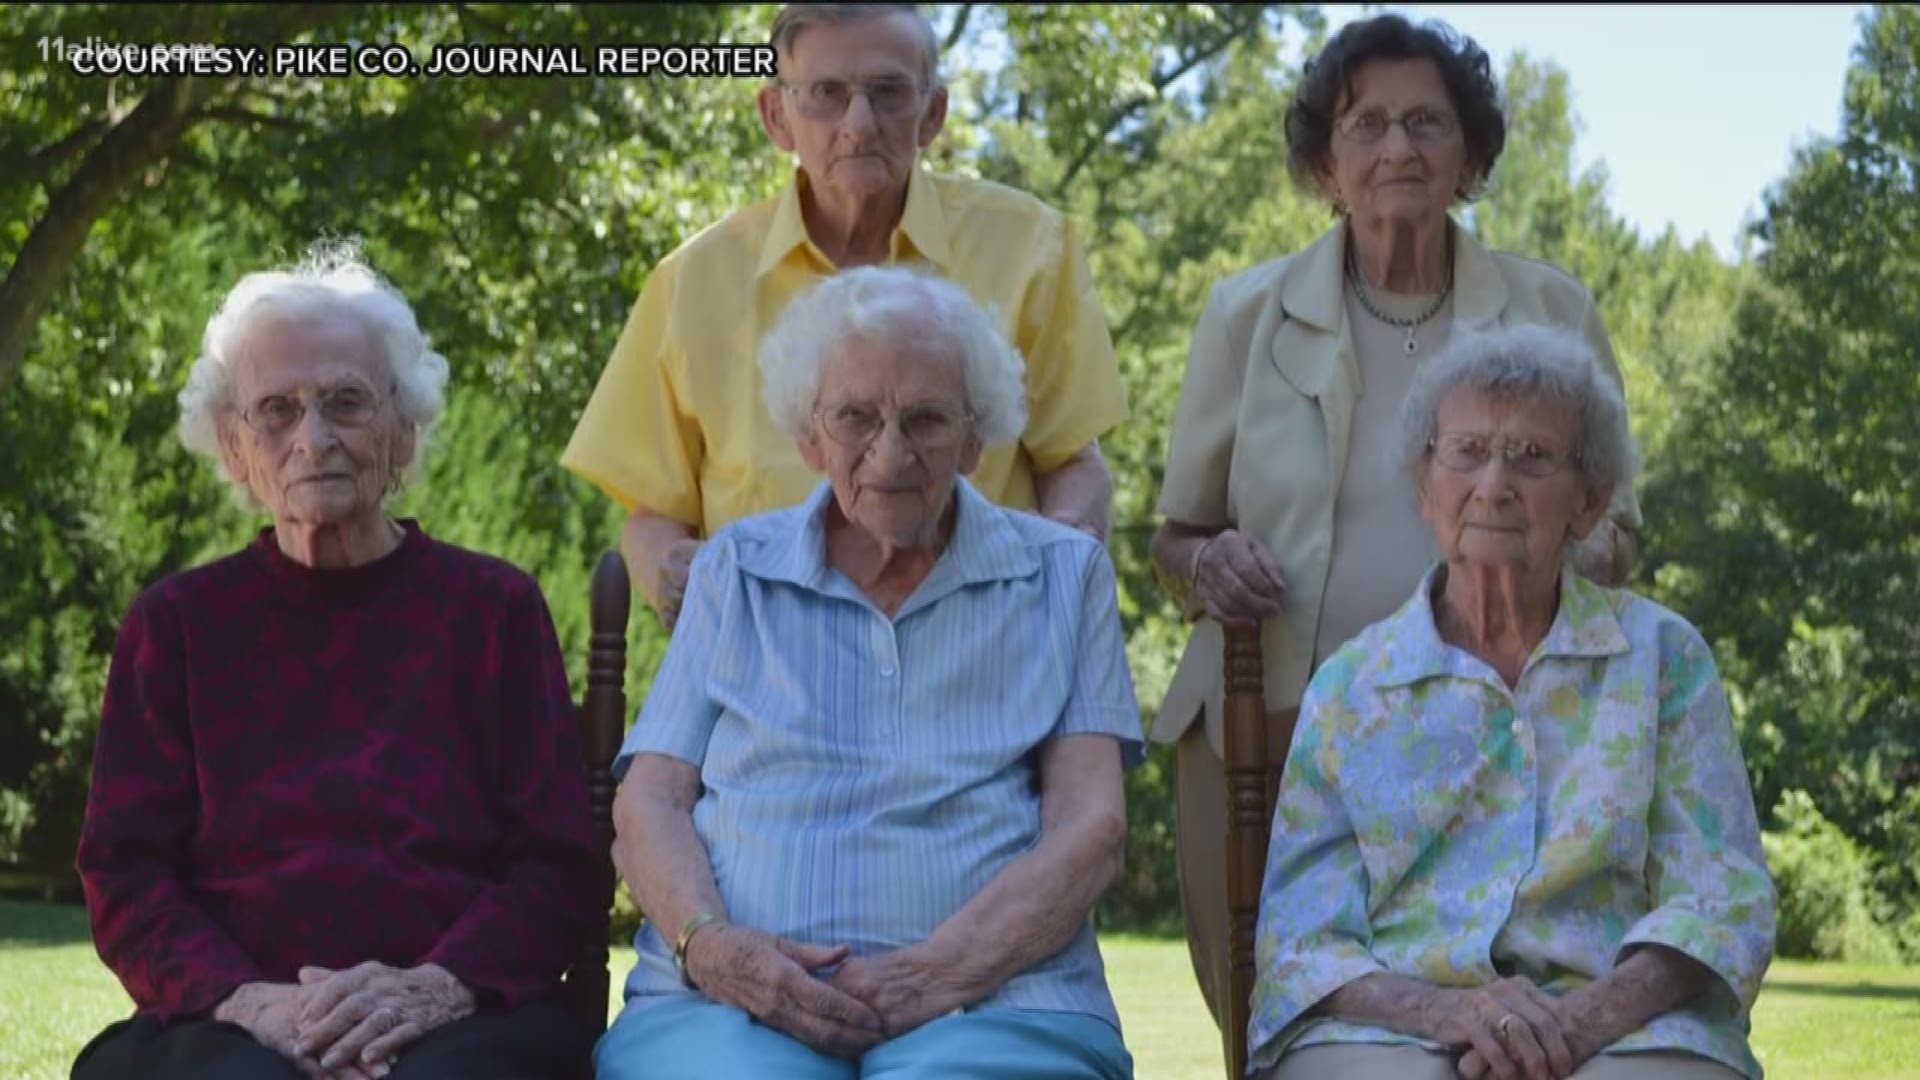 The five Mangham siblings in Pike County are set to be honored on Sunday afternoon after they earned a spot in the Guinness Book of World Records as the five oldest siblings in the world.